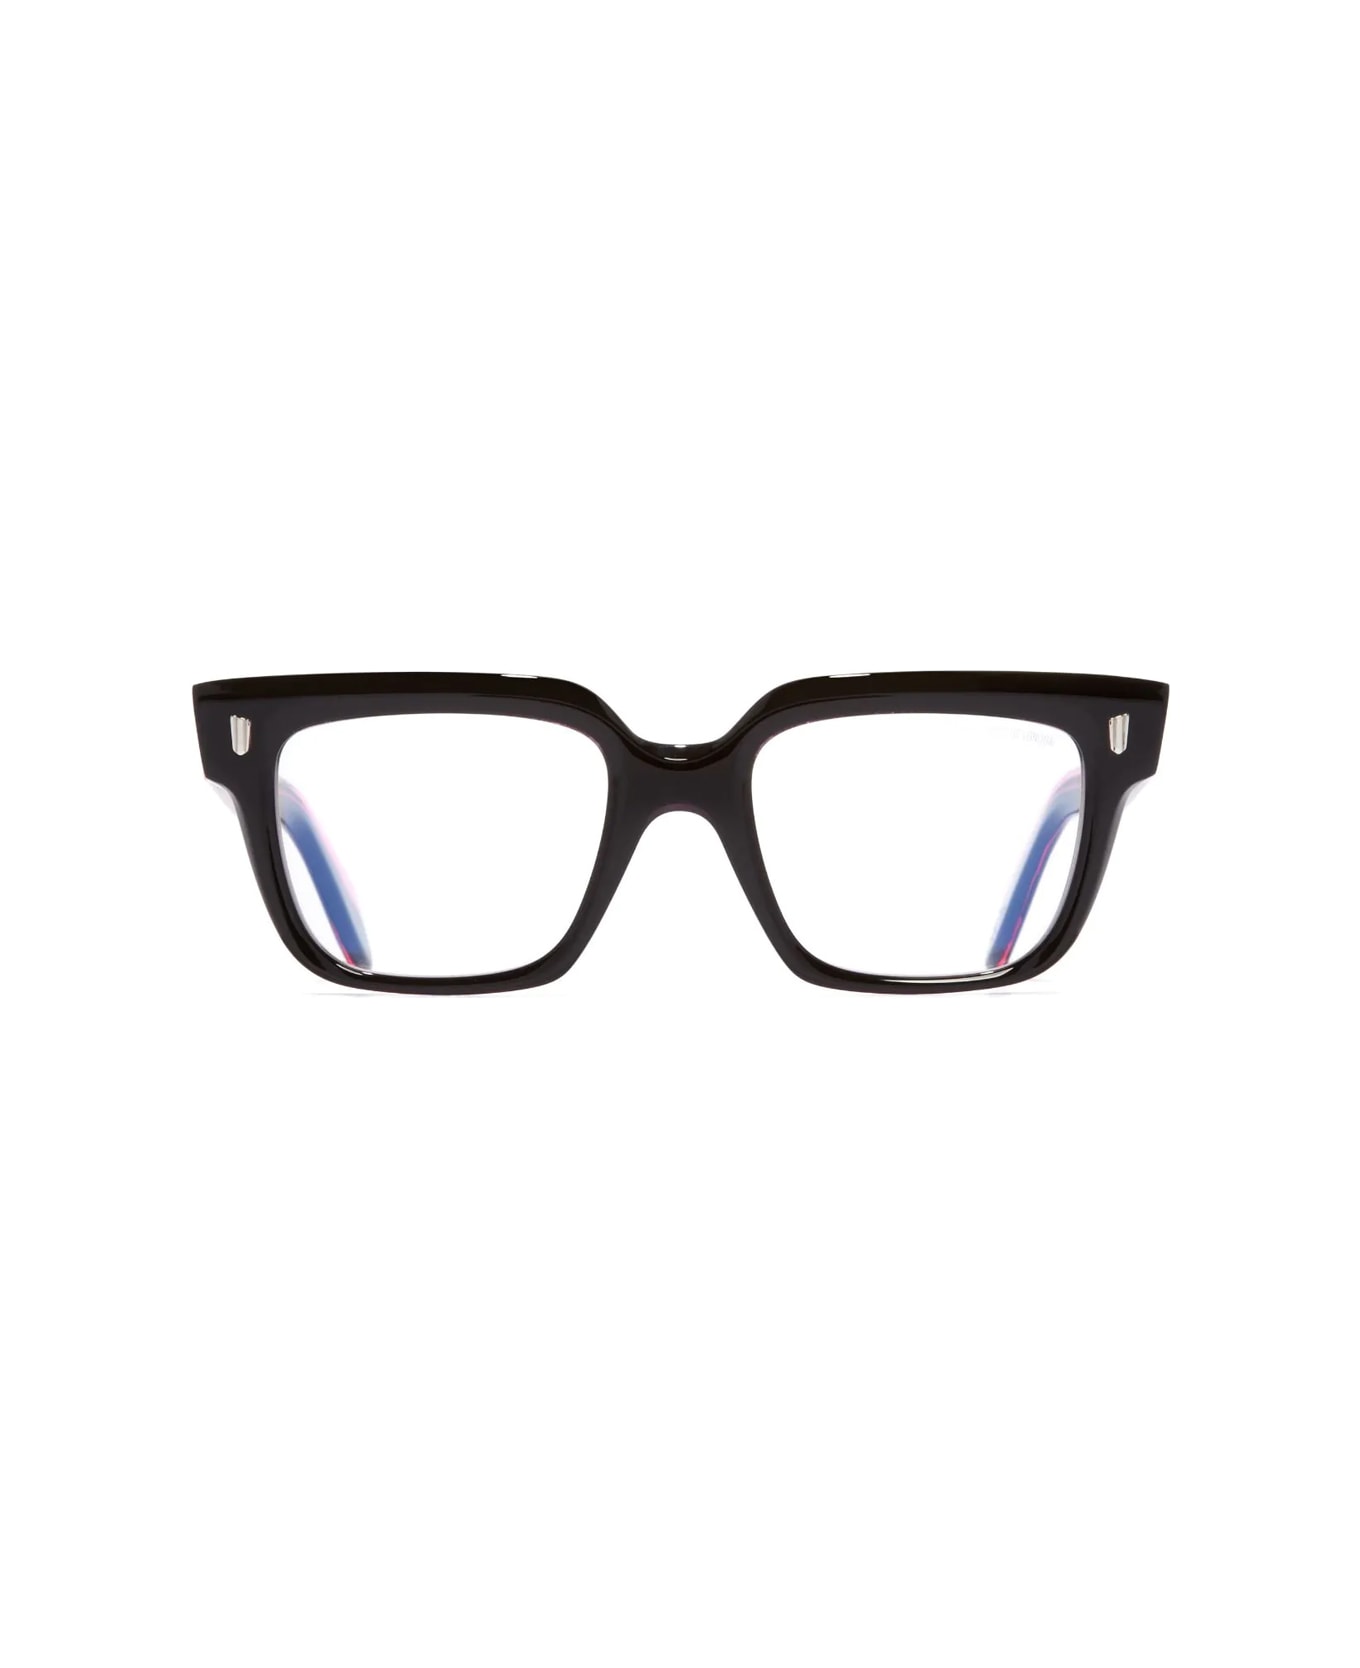 Cutler and Gross 9347 01 Glasses - Nero